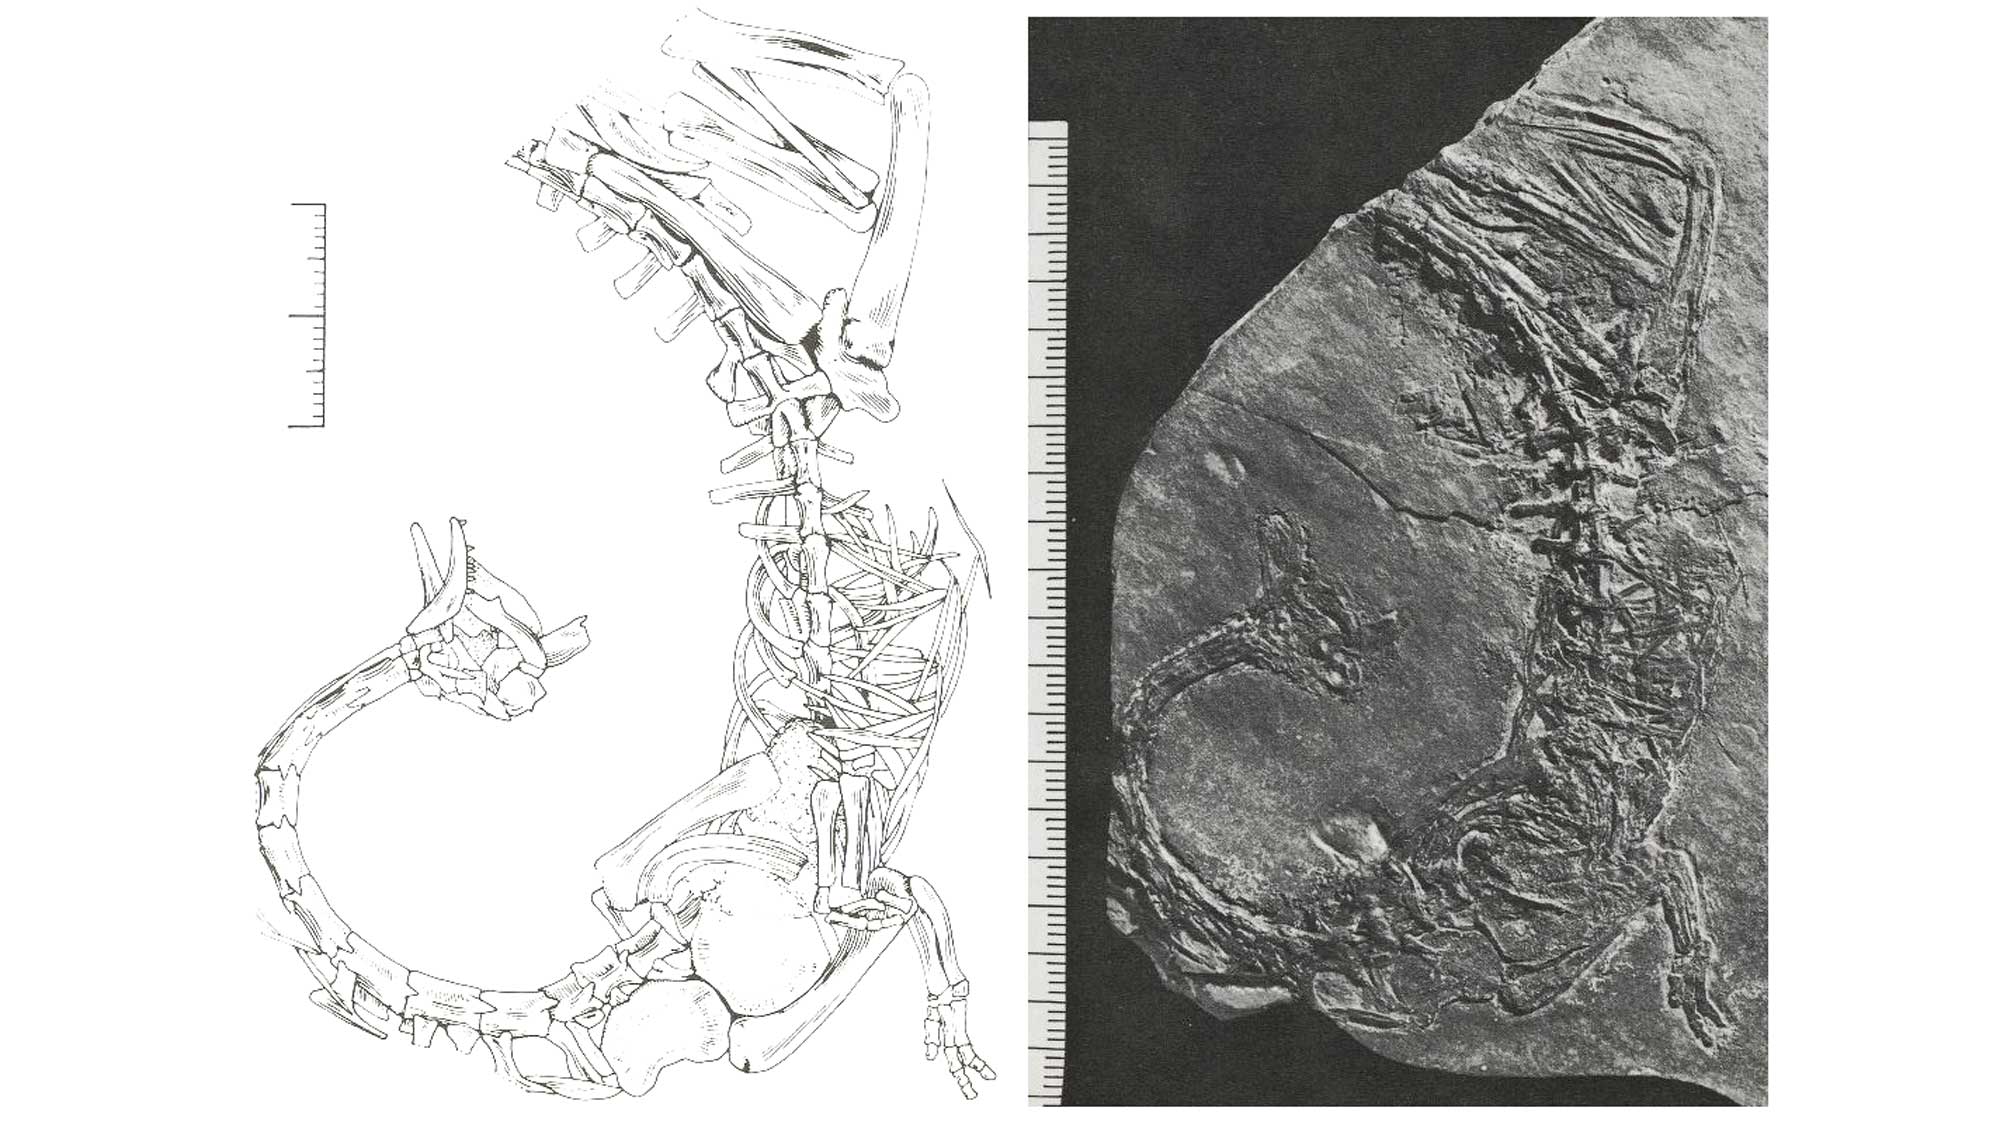 2-Panel figure of Tanytrachelos ahynis, a Late Triassic reptile from Virginia and North Carolina.